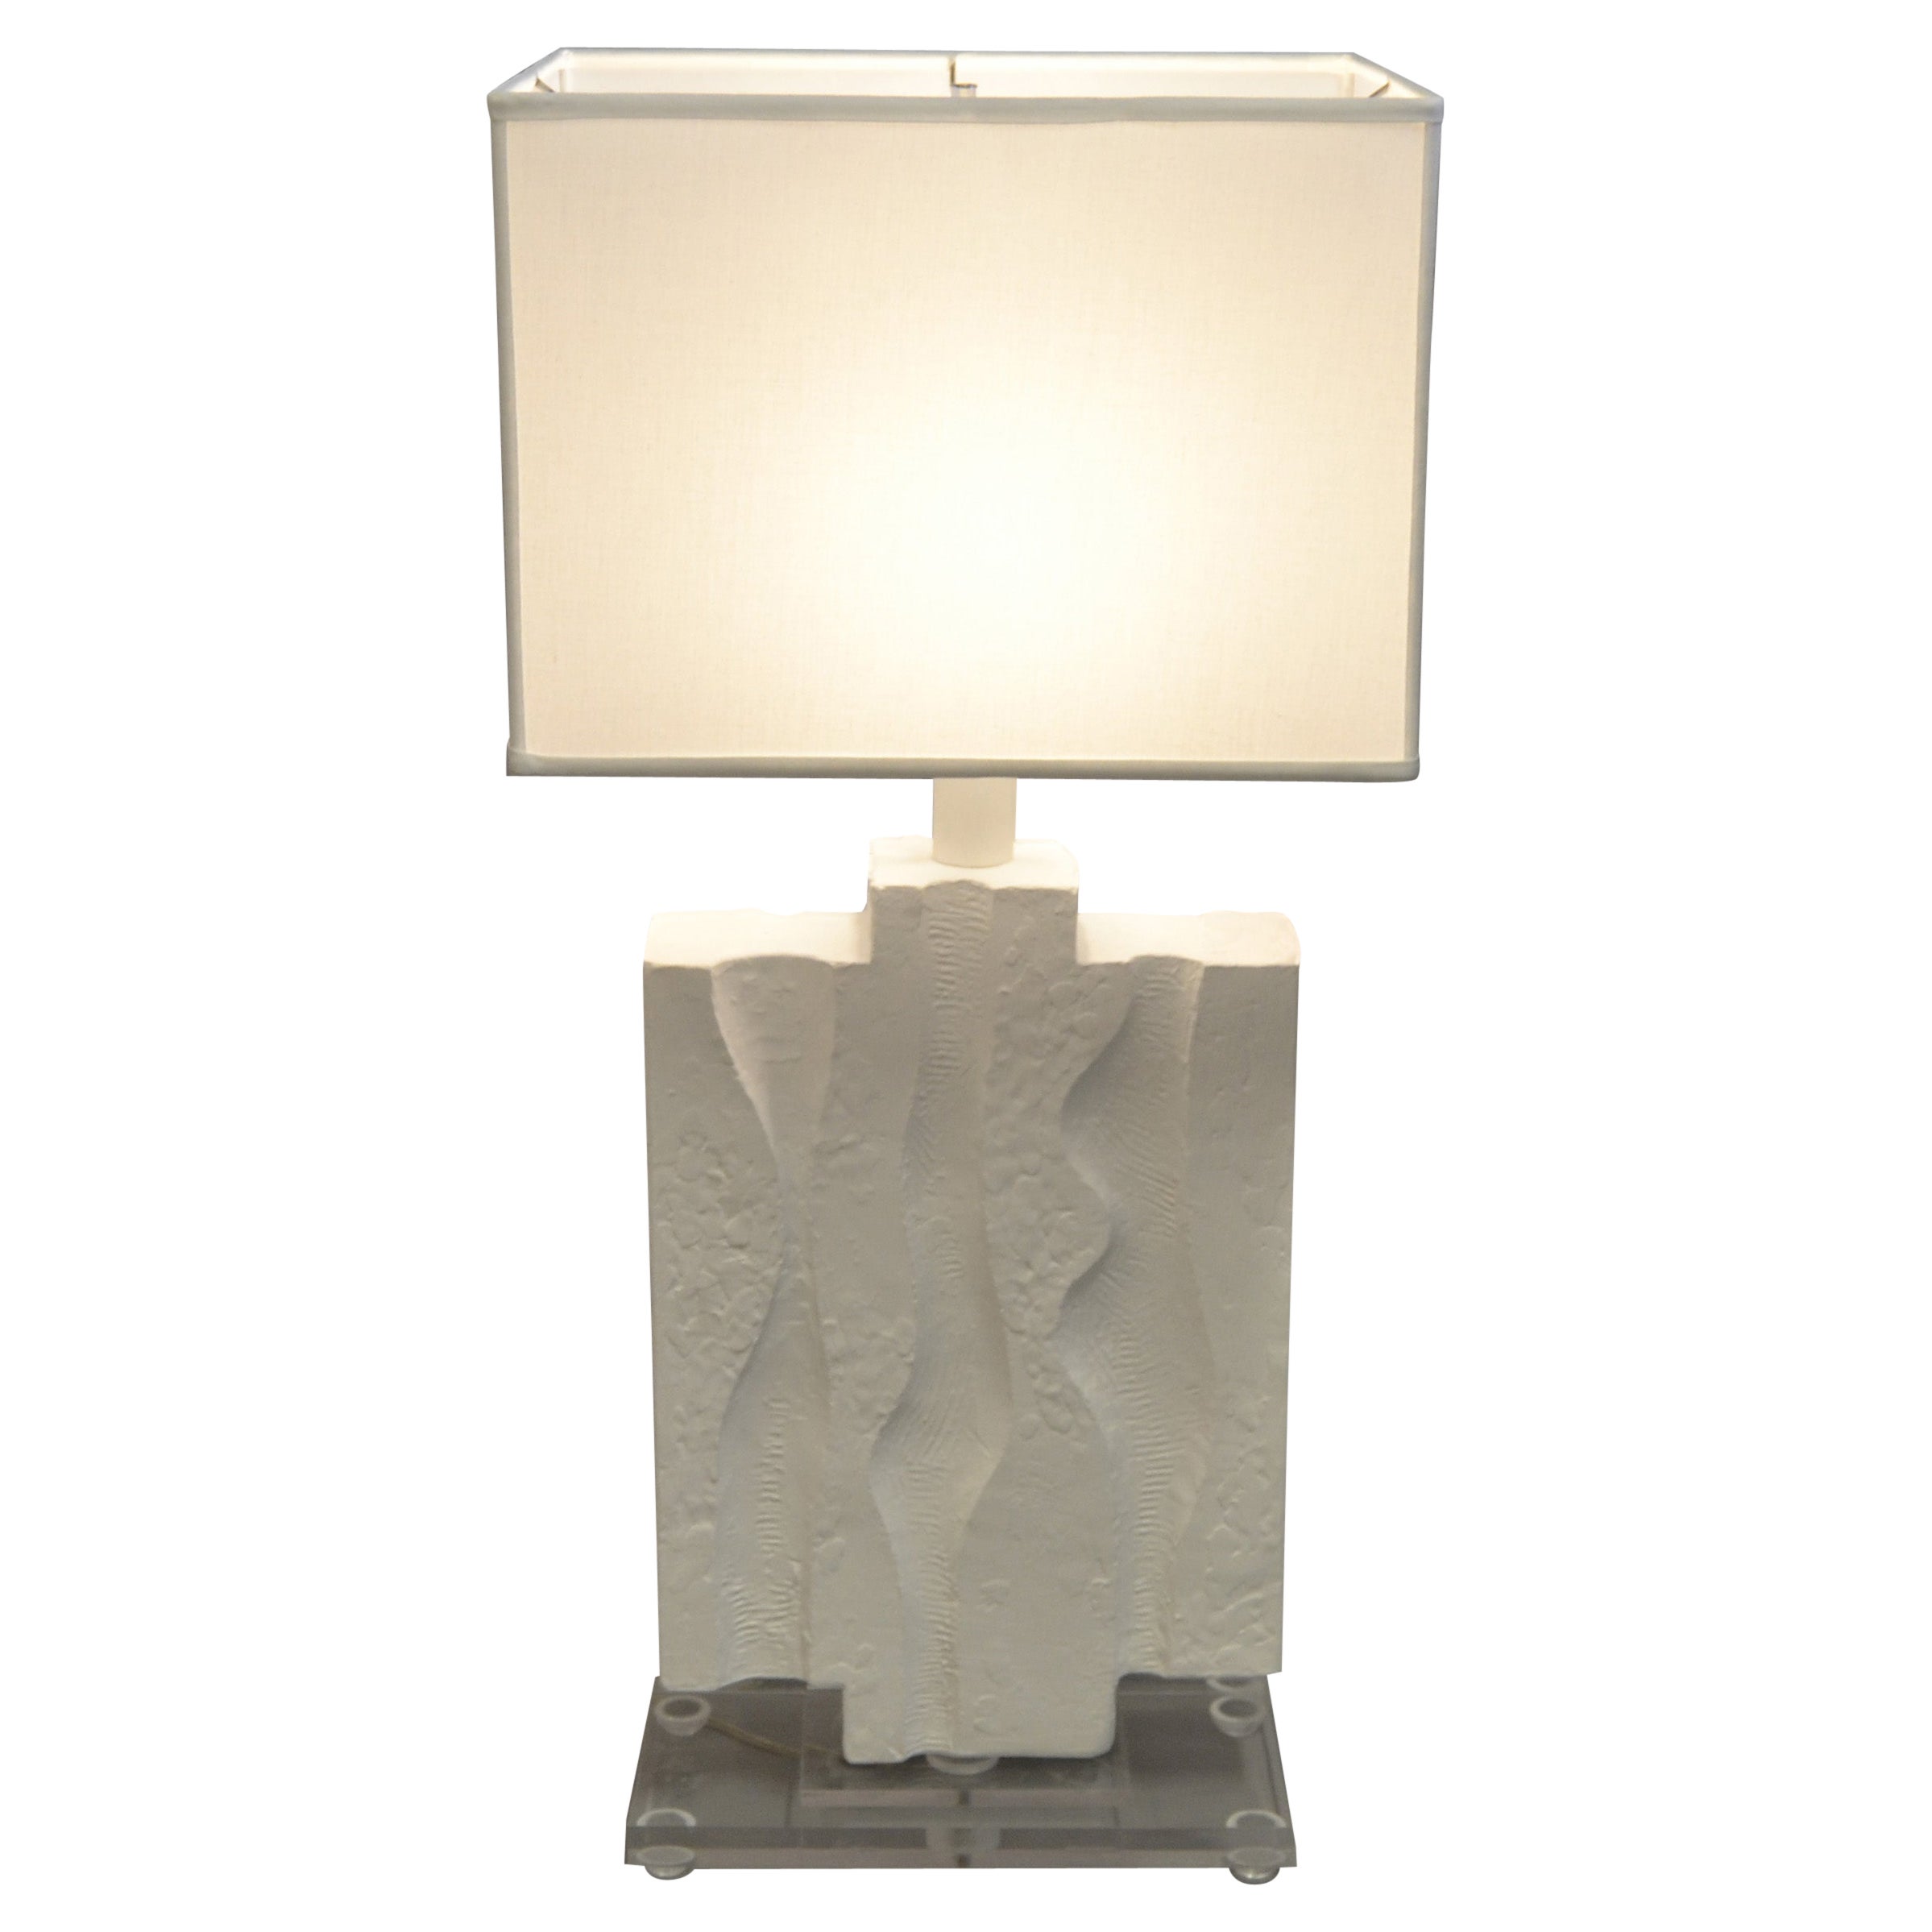 Iconic Sculptural Textured White Gesso Finish Plaster Table Lamp Acrylic Base